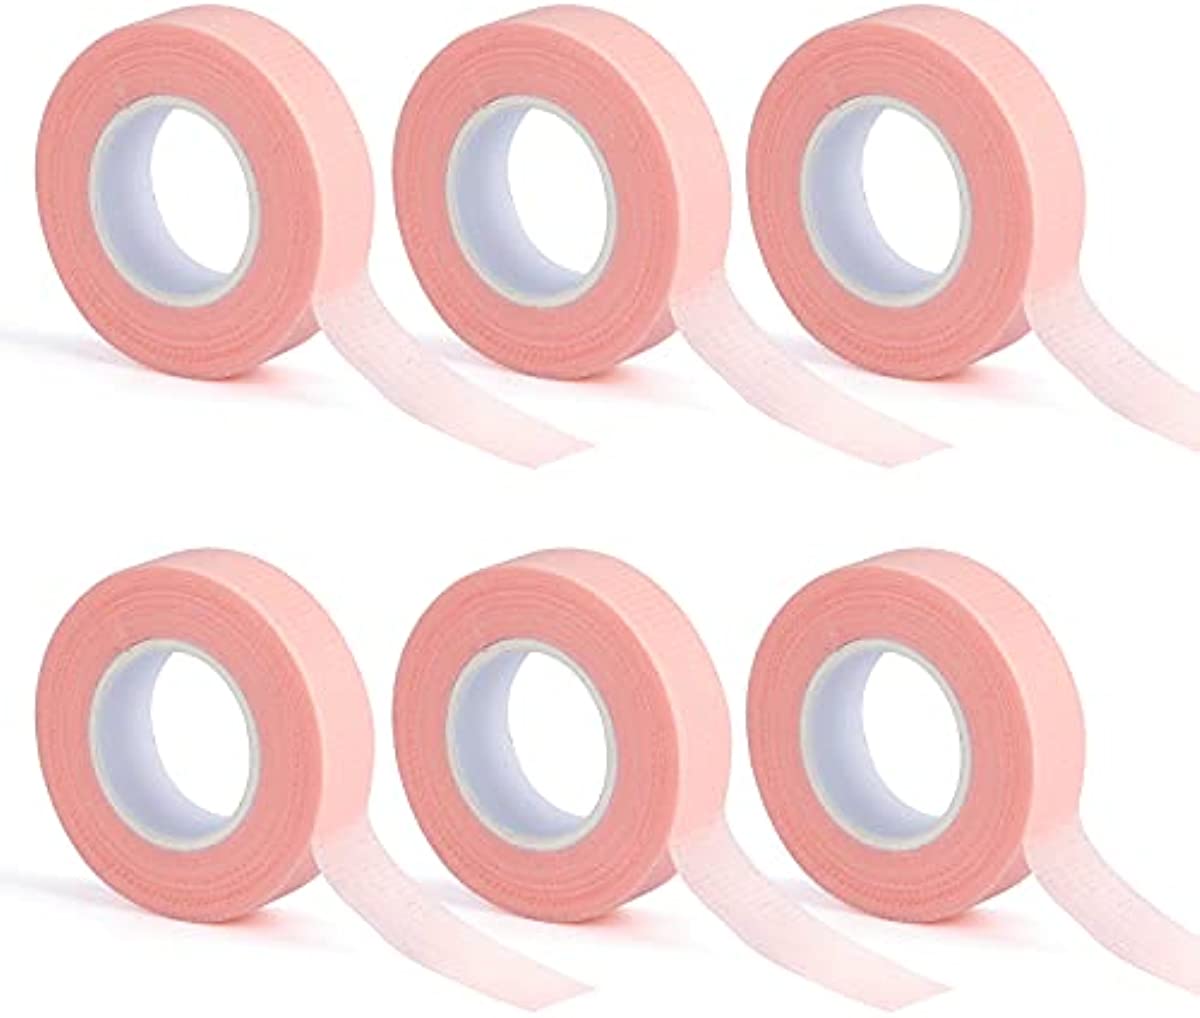 6 Rolls PE Micropore Medical Tape Roll for Individual Eyelash Extensions,1/2\'\' x 10 Yards - Individual Package (Pink)